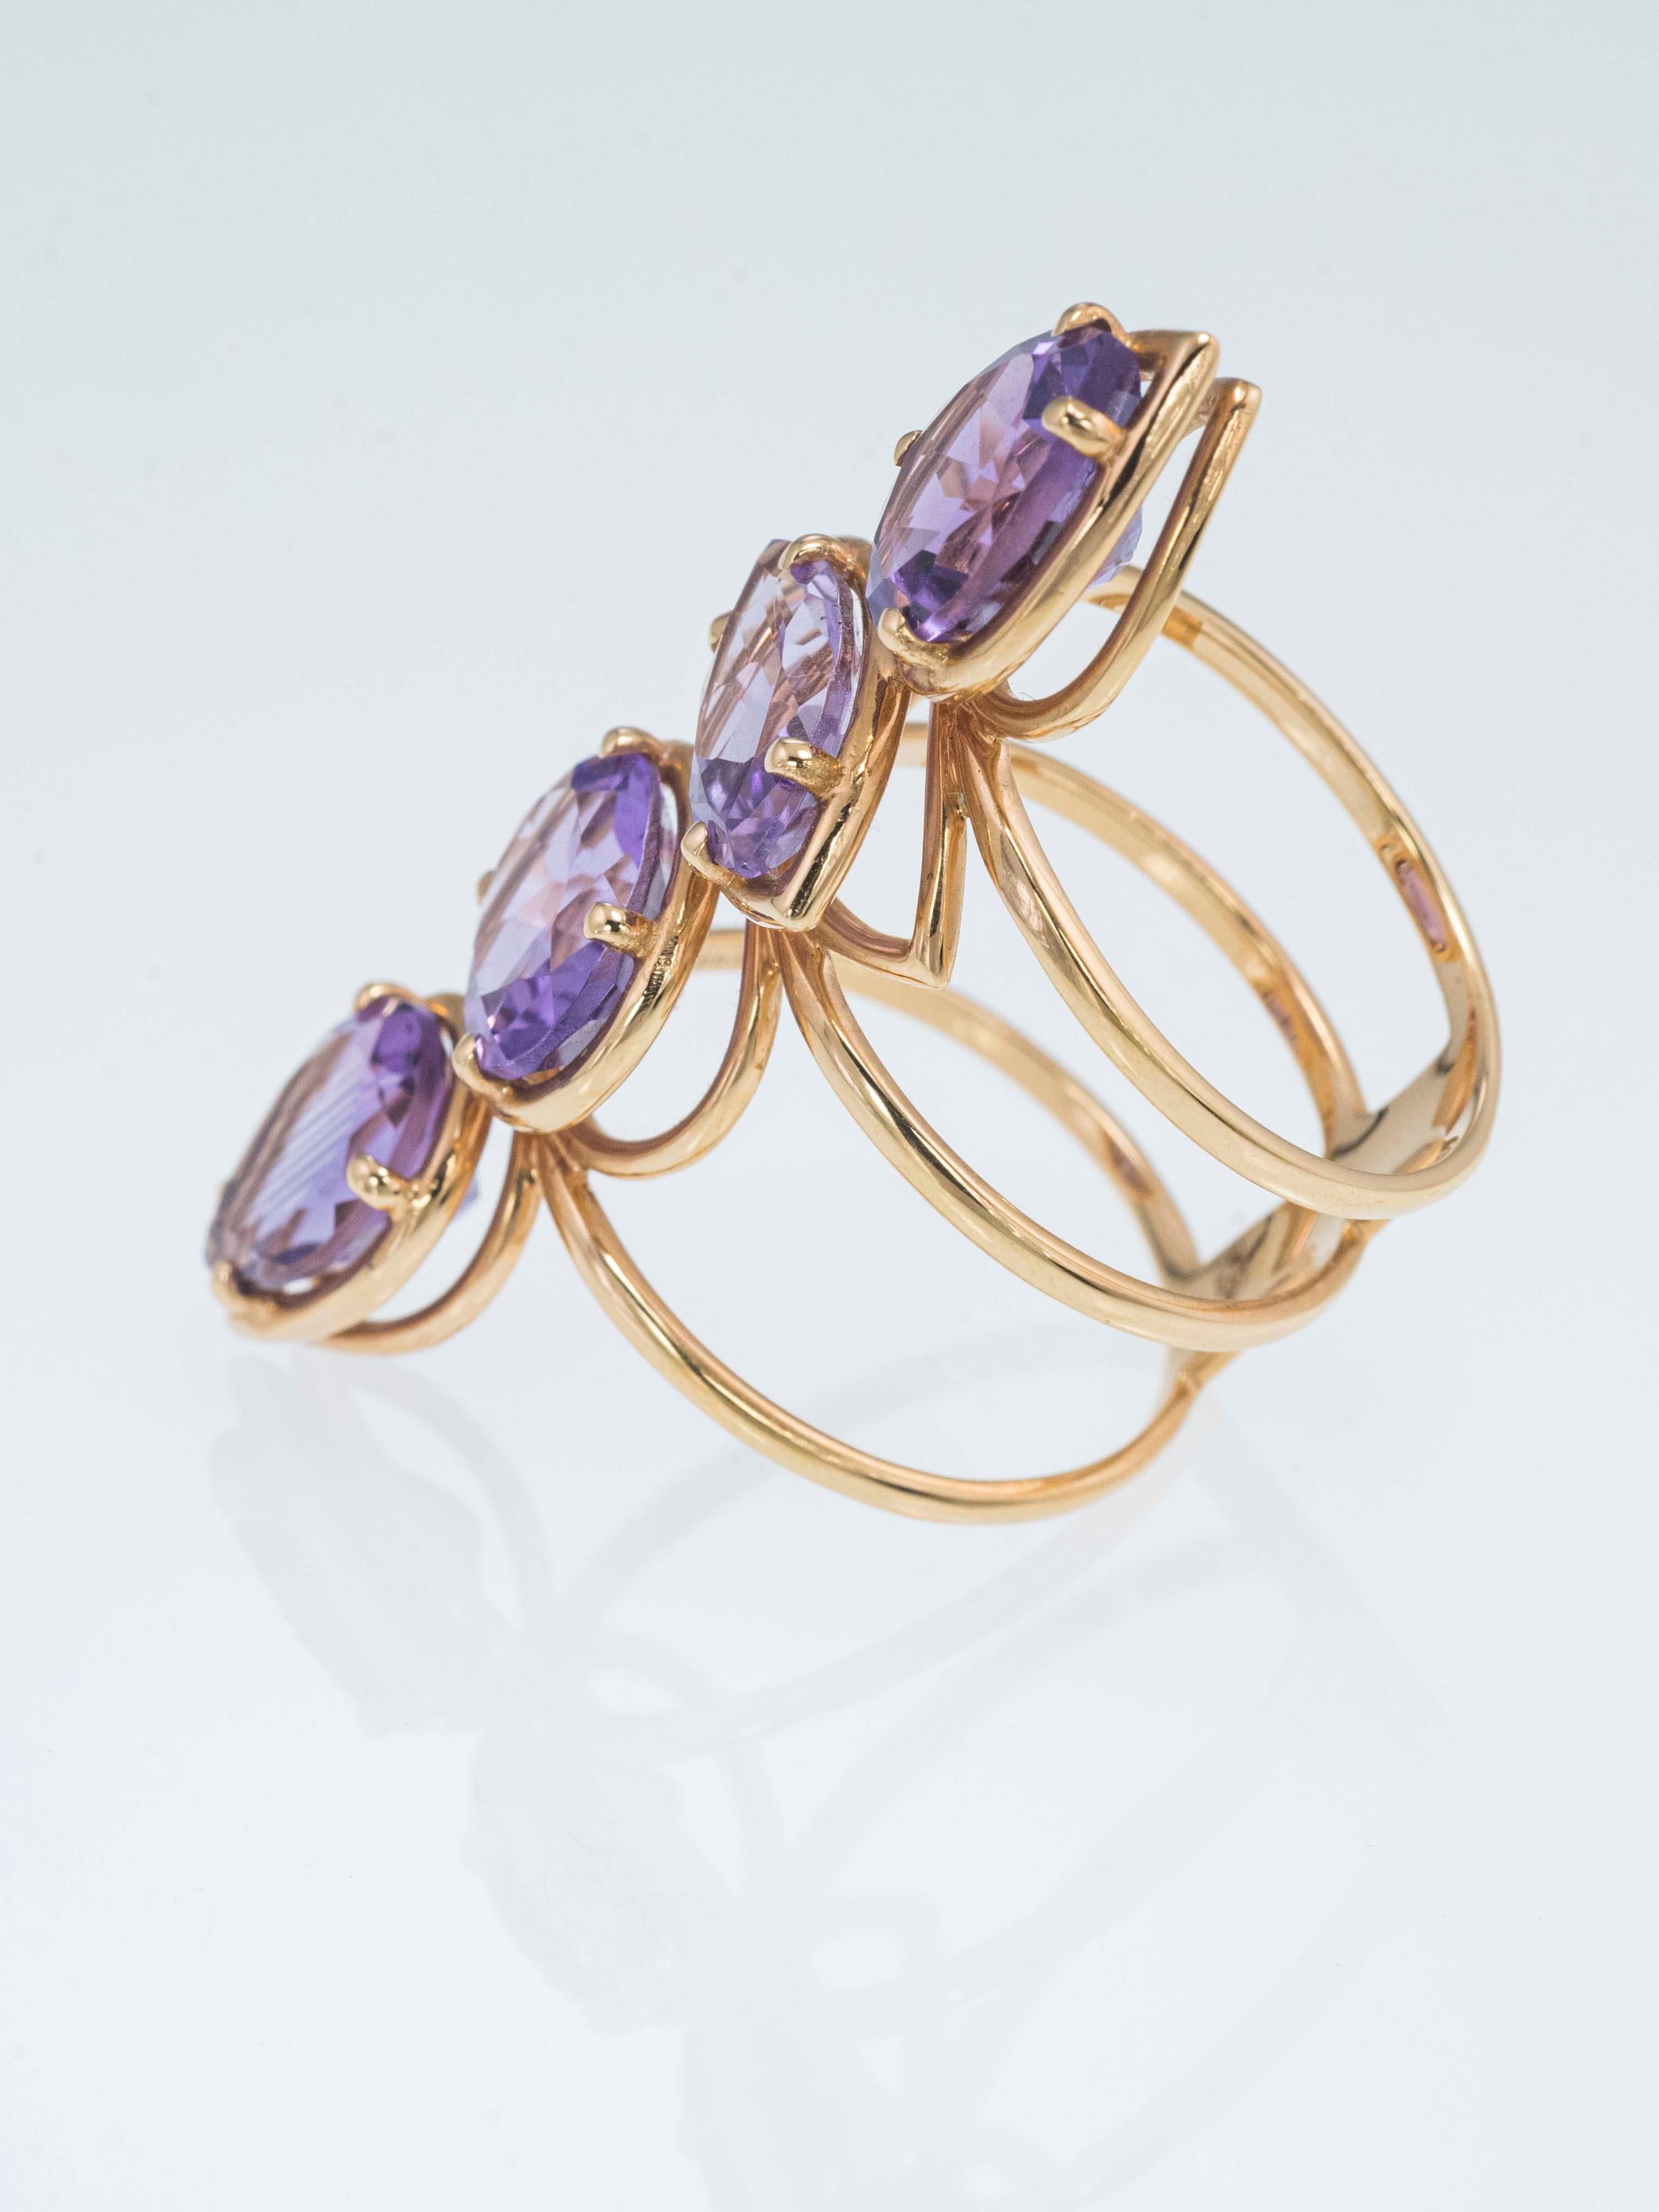 This Etho Maria ring has a fancy, light and elegant design.
It's made up by three different kind of Amethyst cut. Two stones have a pear cut, one has an oval cut and one has a marquise cut for a total weigh of ct  7.70.

Size 6 1/2 This ring is